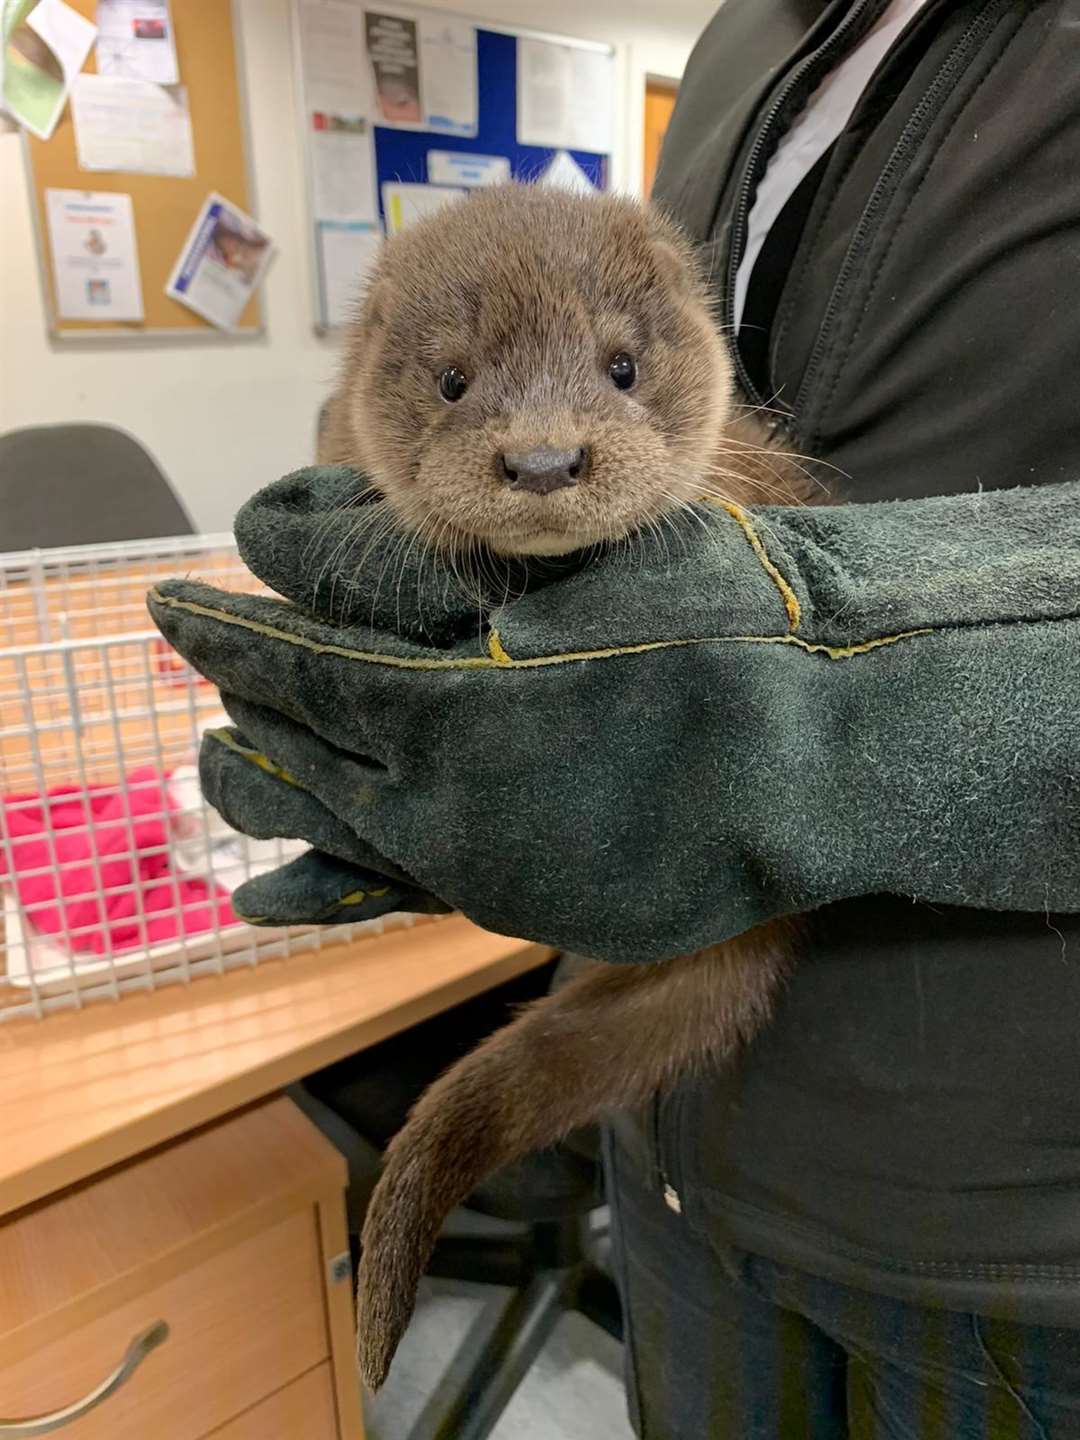 The cute mammal was picked up by a member of the public yesterday (Monday).